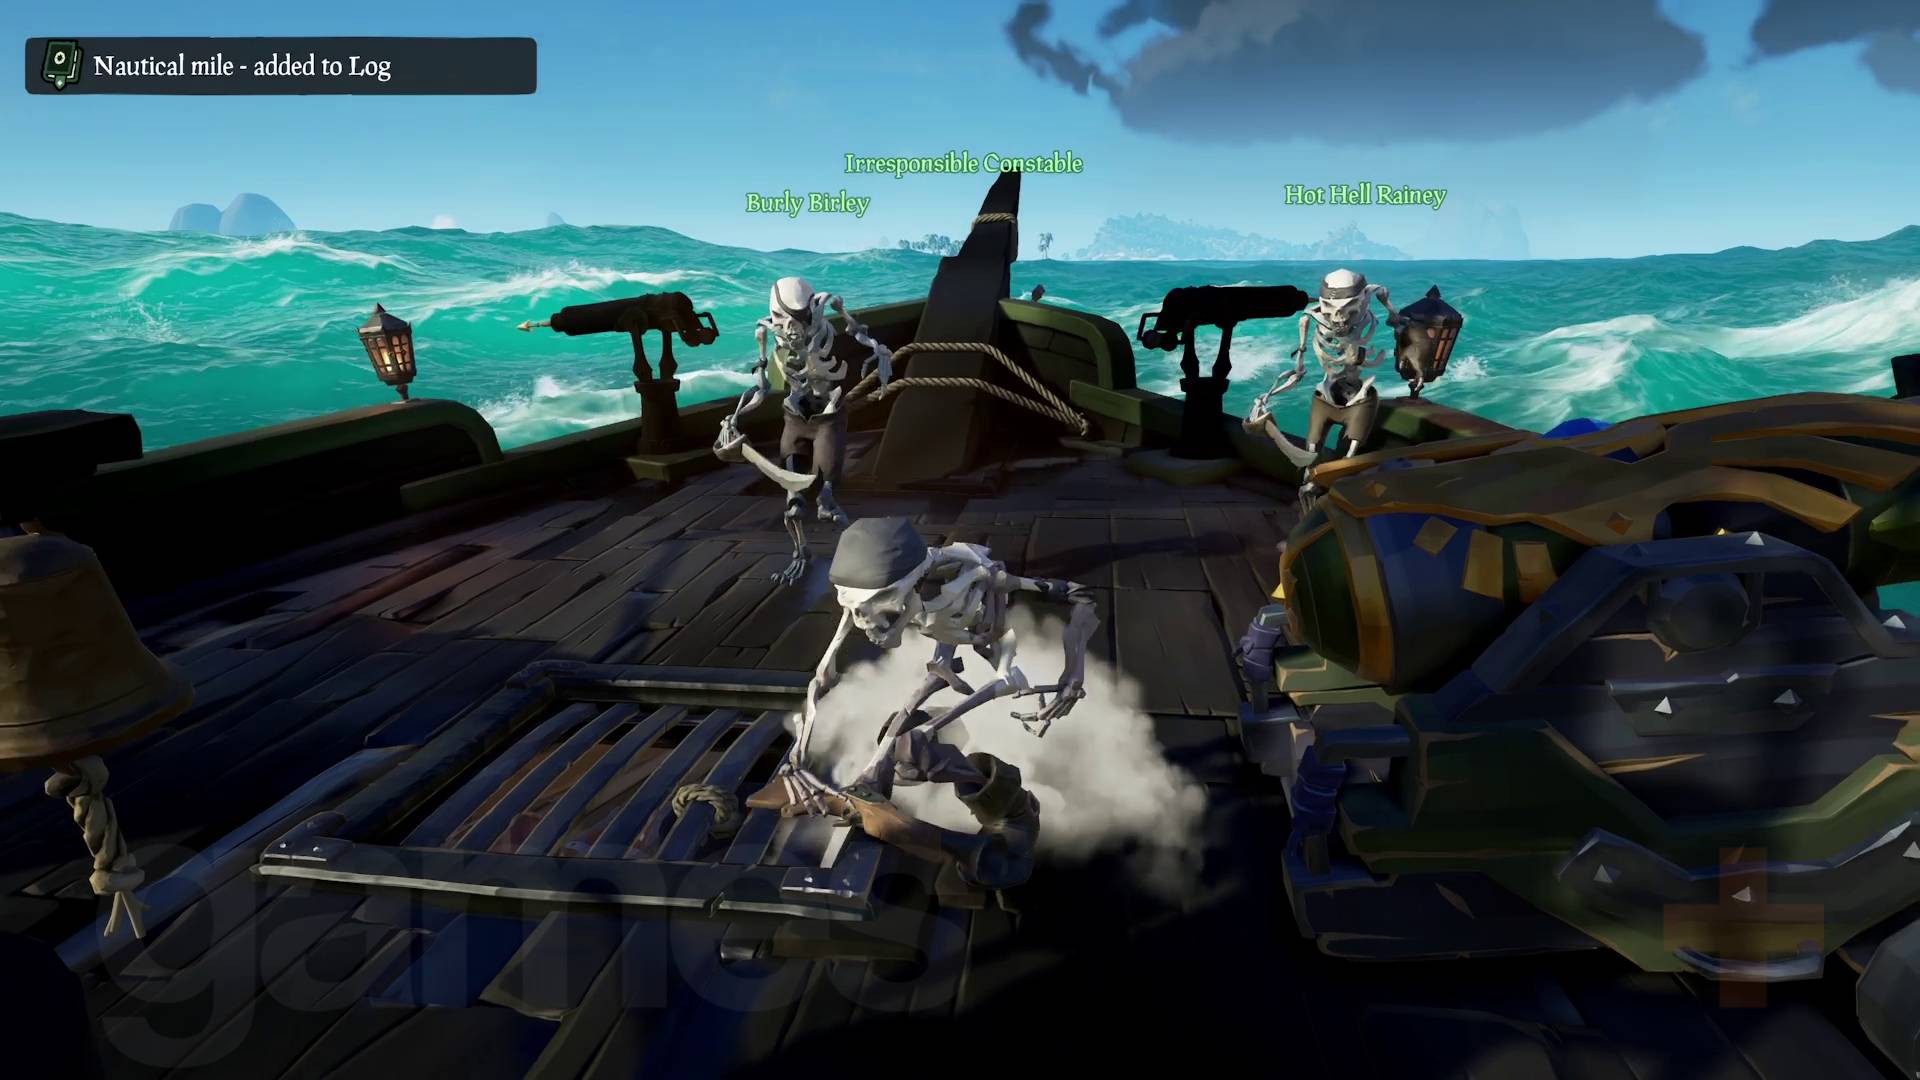 Sea of Thieves Bone Caller skeletons summoned on ship